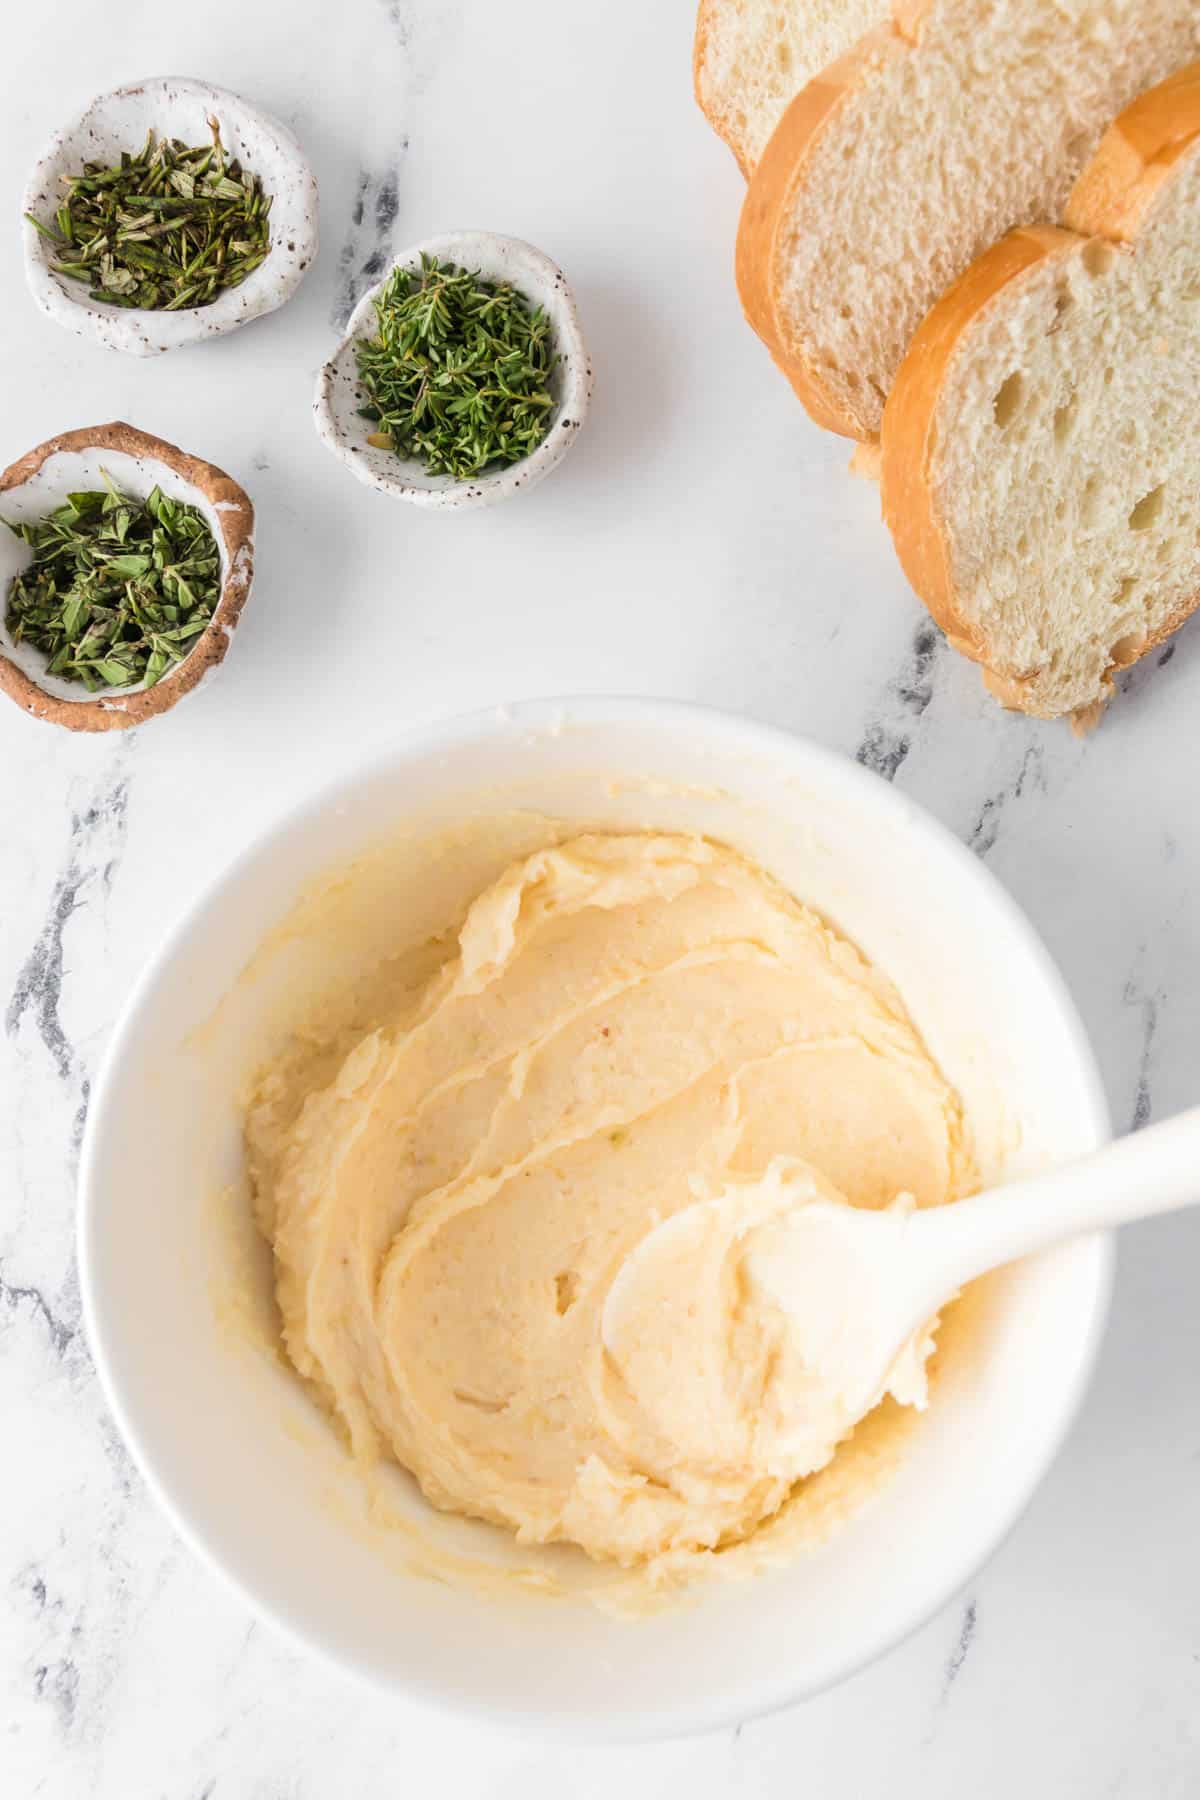 A spoon being used to mix softened butter in a white bowl next to small bowls of herbs and sliced Italian bread.